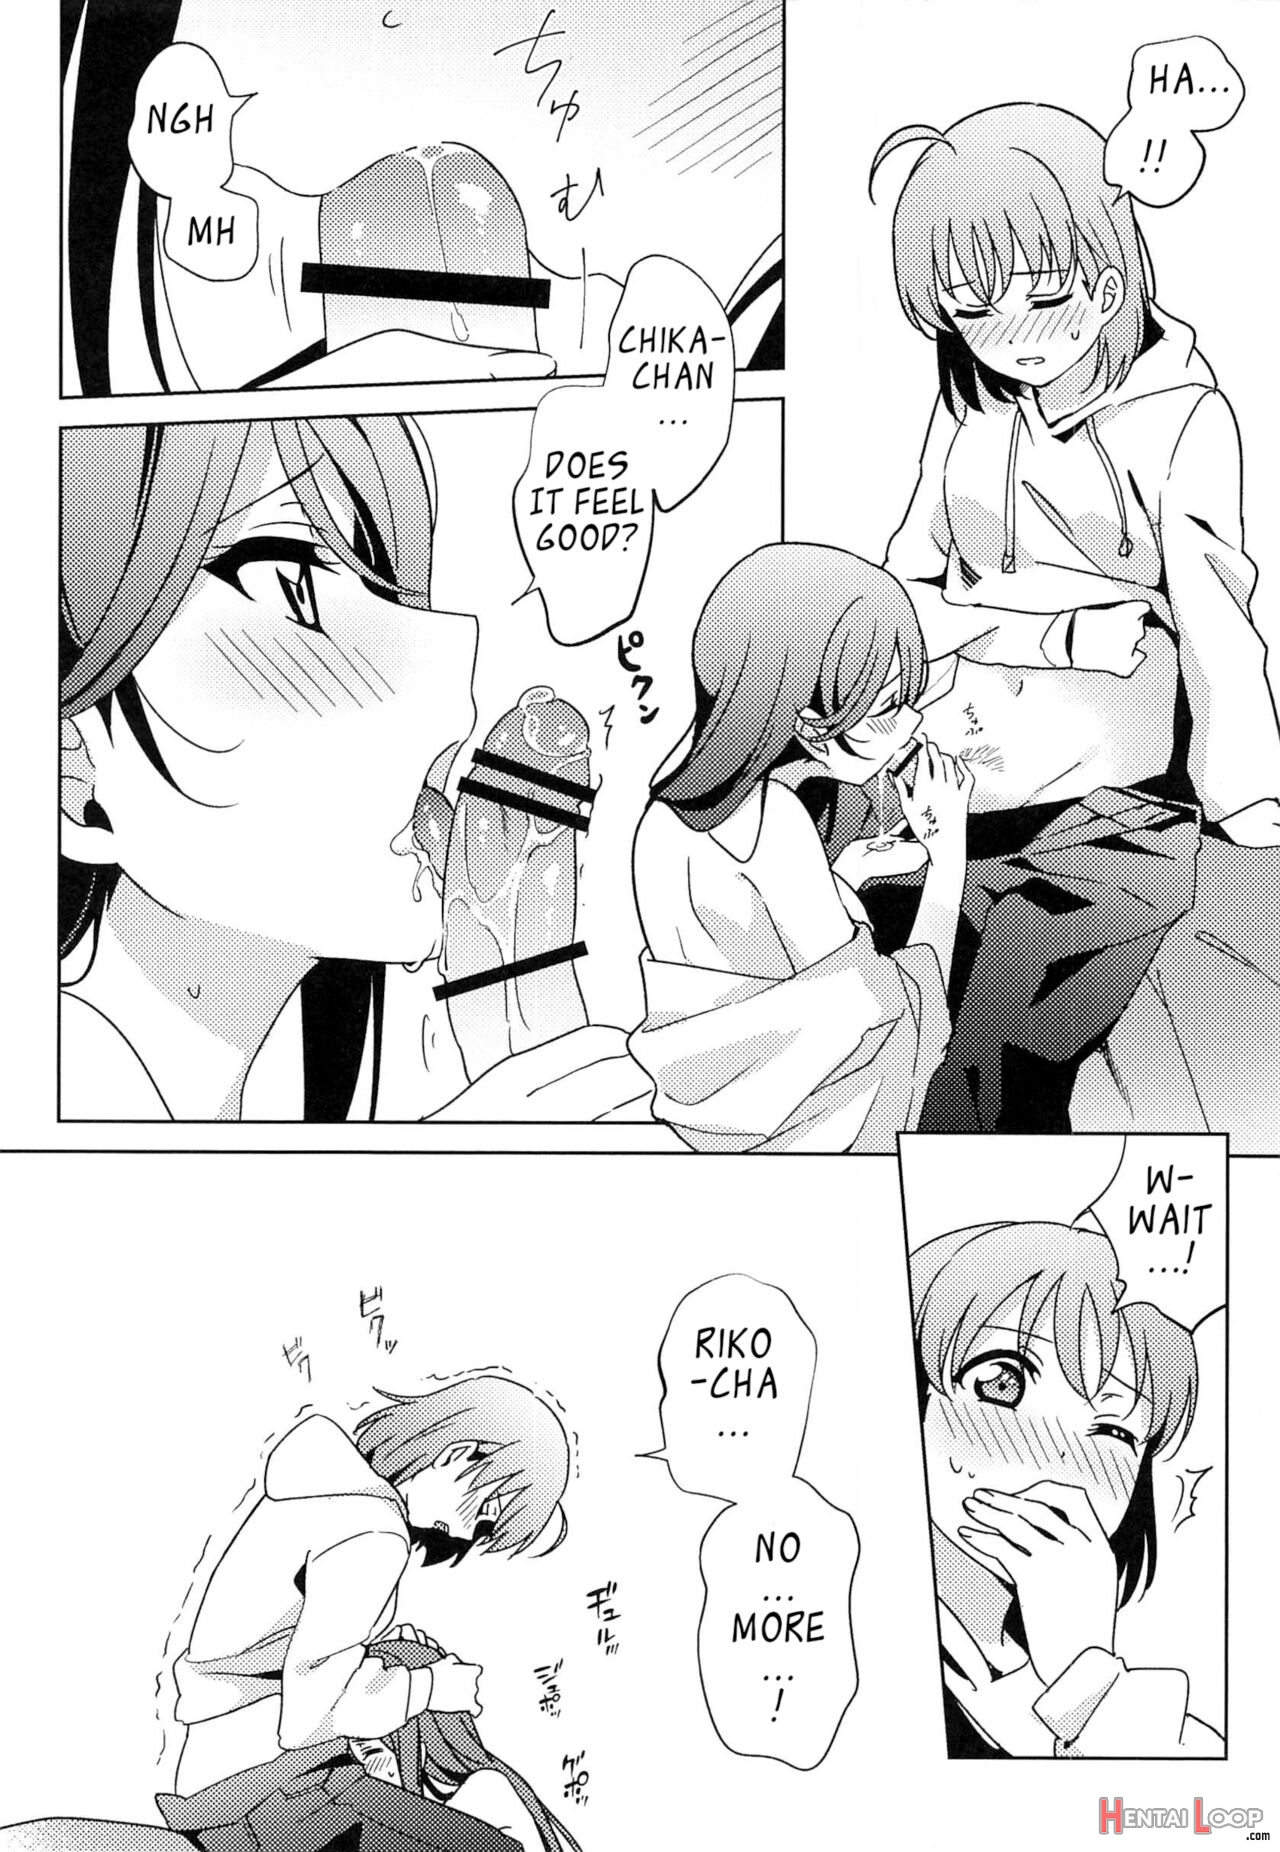 Chika-chan's ○○ Can't Fit page 5